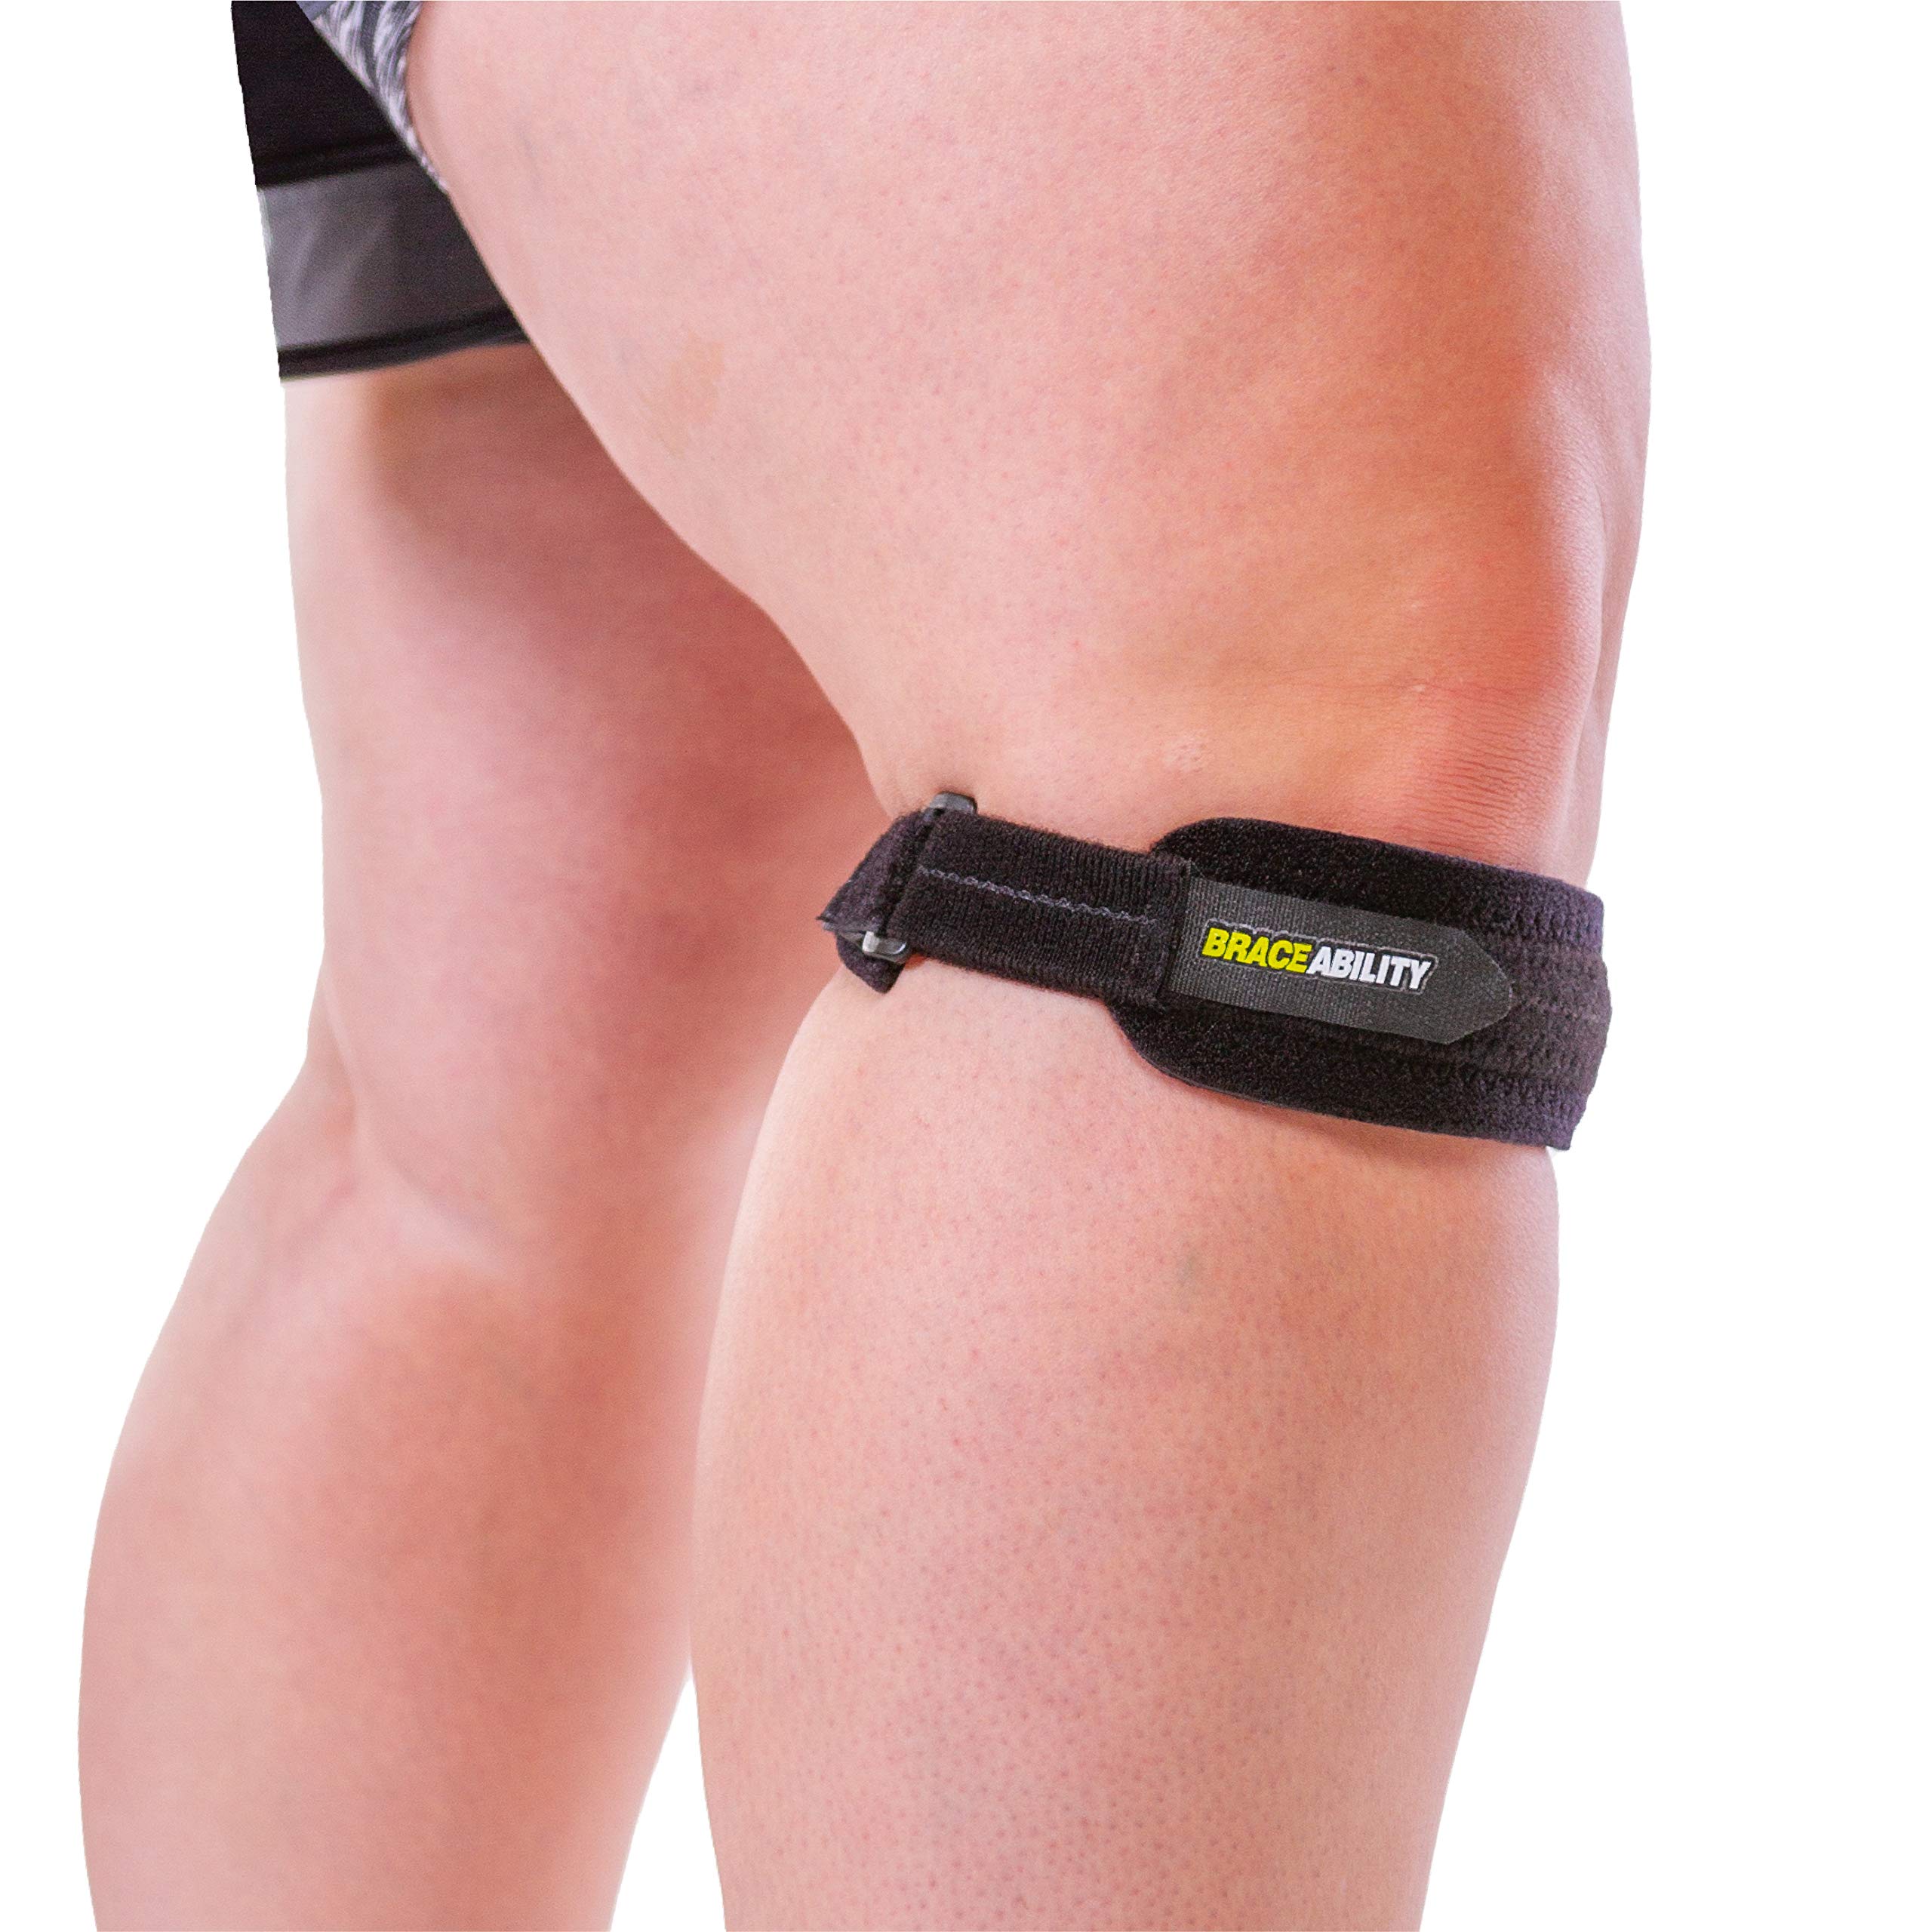 BraceAbility Plus Size Patella Tendon Knee Strap - Mens and Womens Extra Large Patellar Stabilizer Brace with Adjustable Band for Runners Knee, Jumpers Tendonitis, Osgood Schlatter Pain Relief (XL)